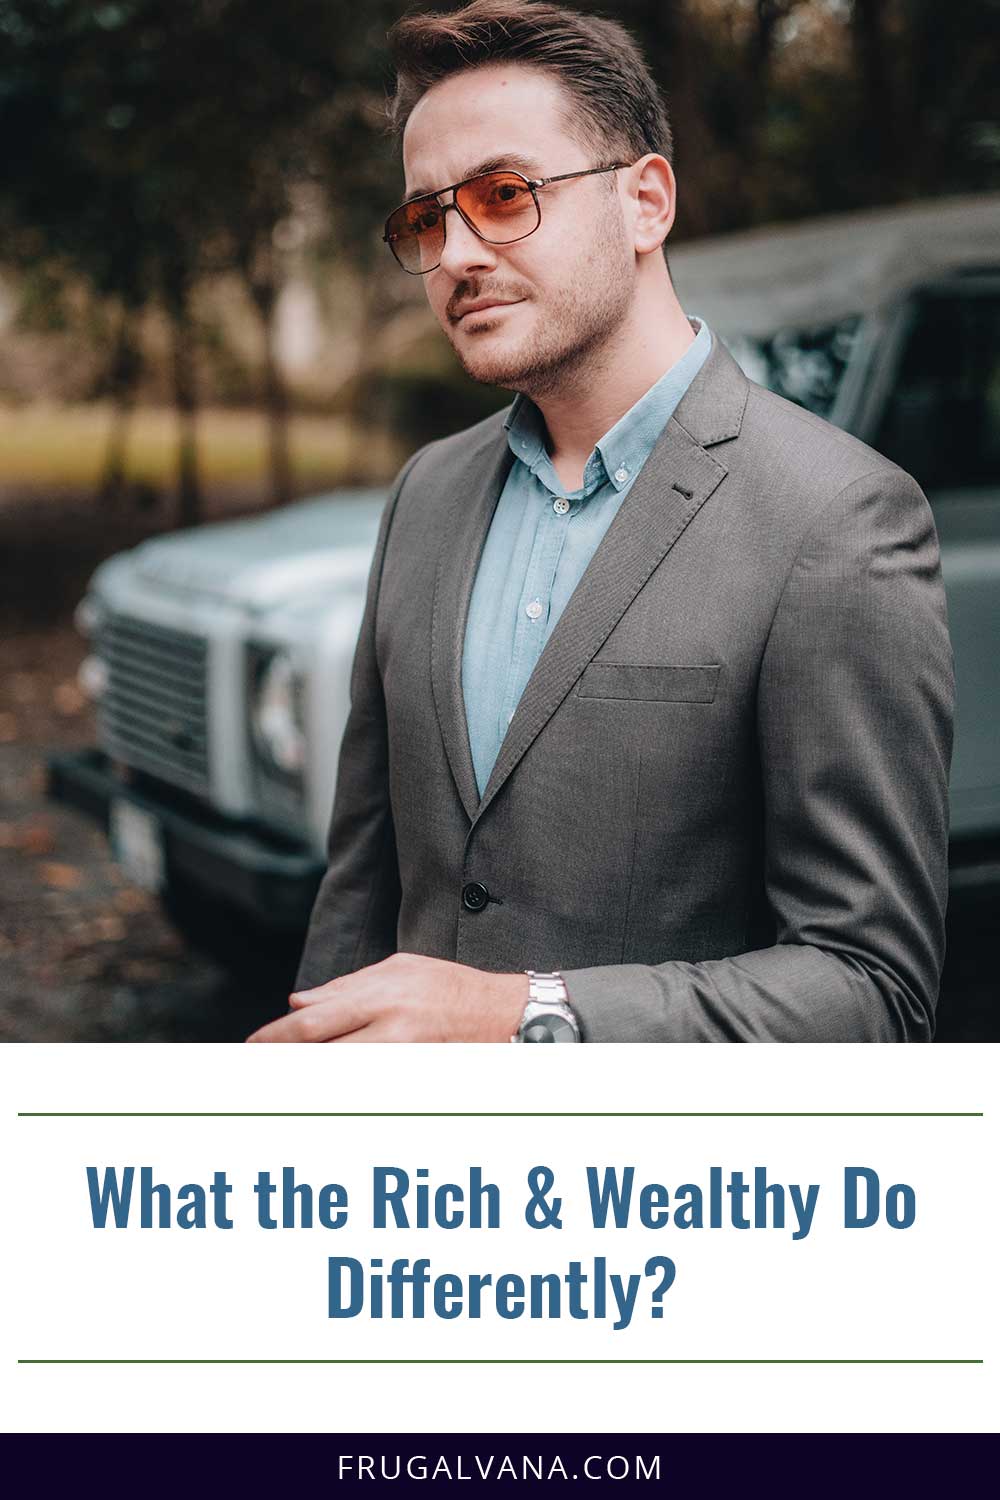 What the Rich & Wealthy Do Differently?